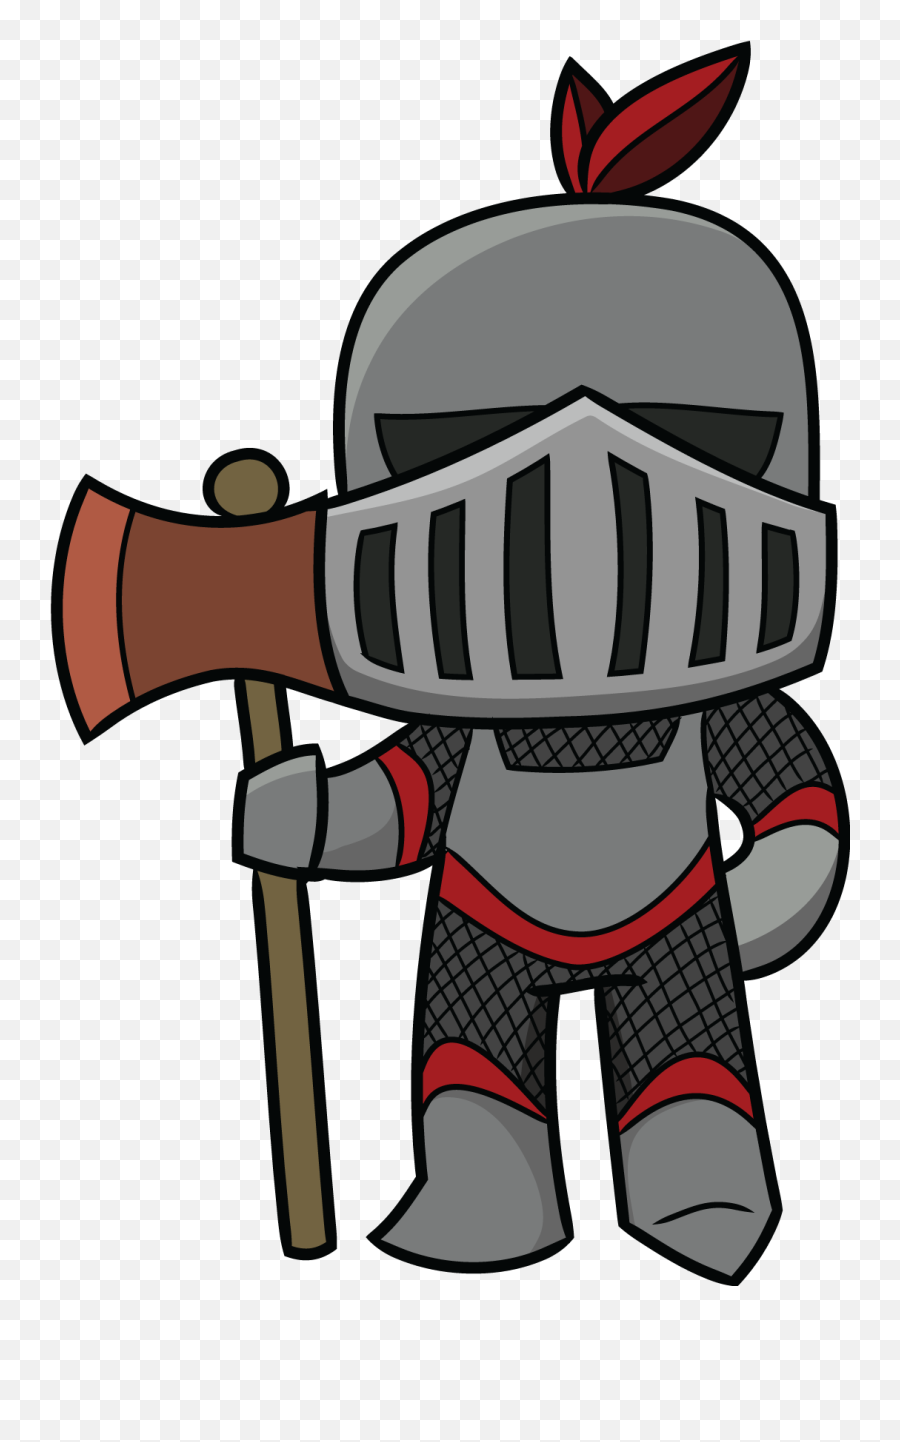 Knight Free To Use Cliparts 3 - Knight Clipart Transparent Emoji,Knight Clipart